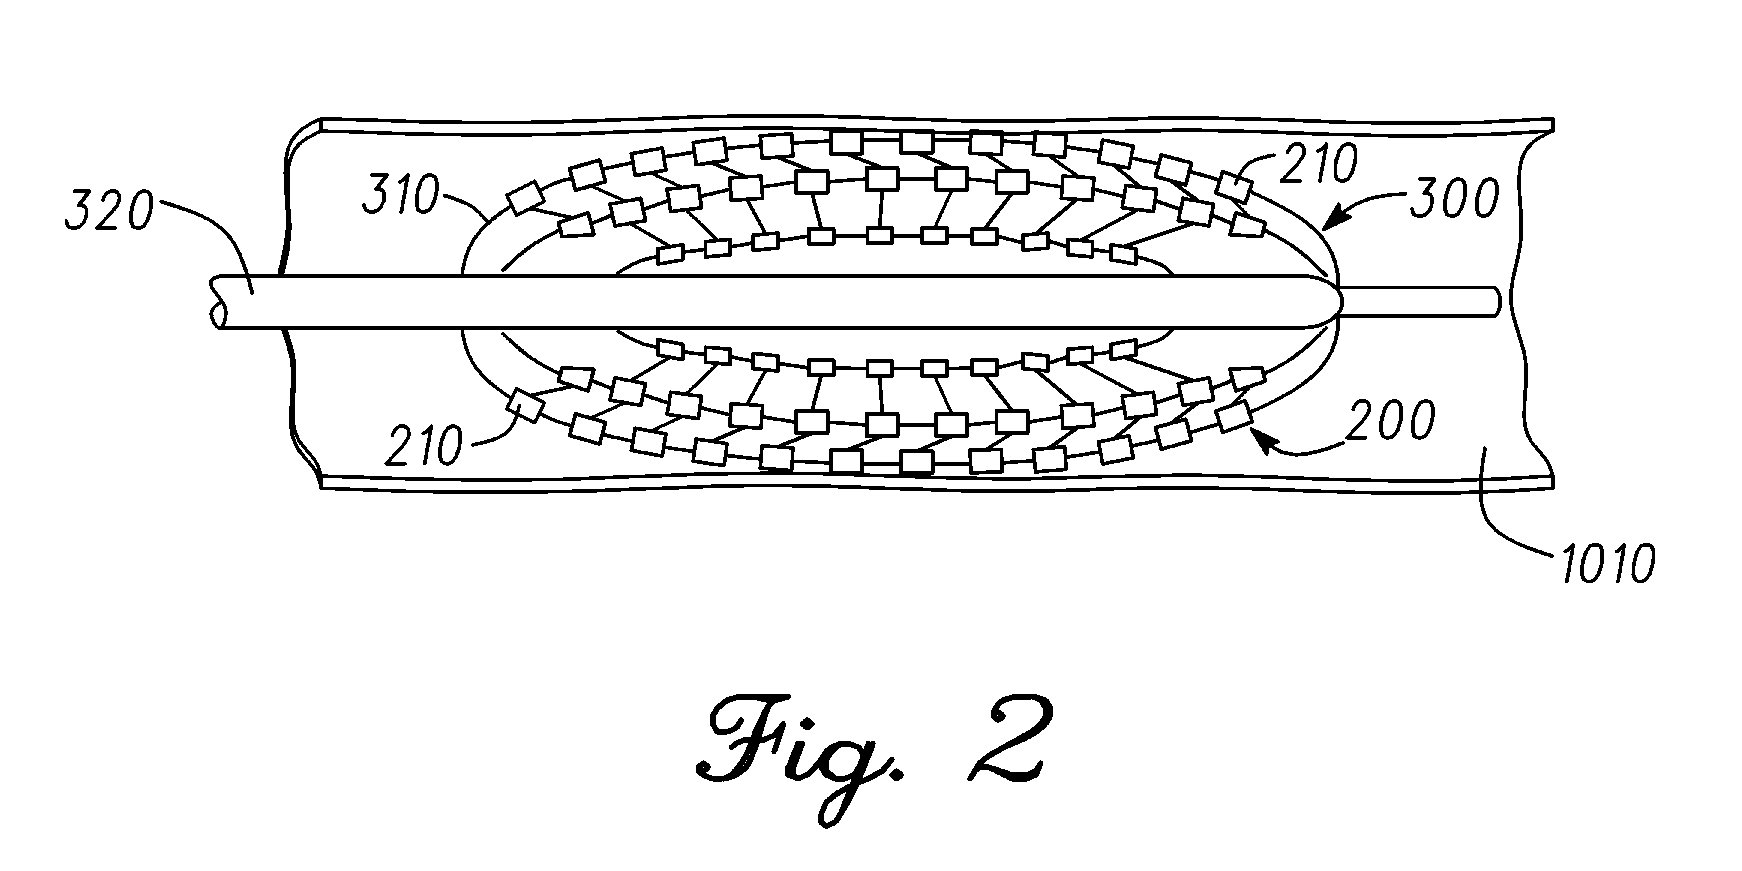 Catheter balloon having stretchable integrated circuitry and sensor array